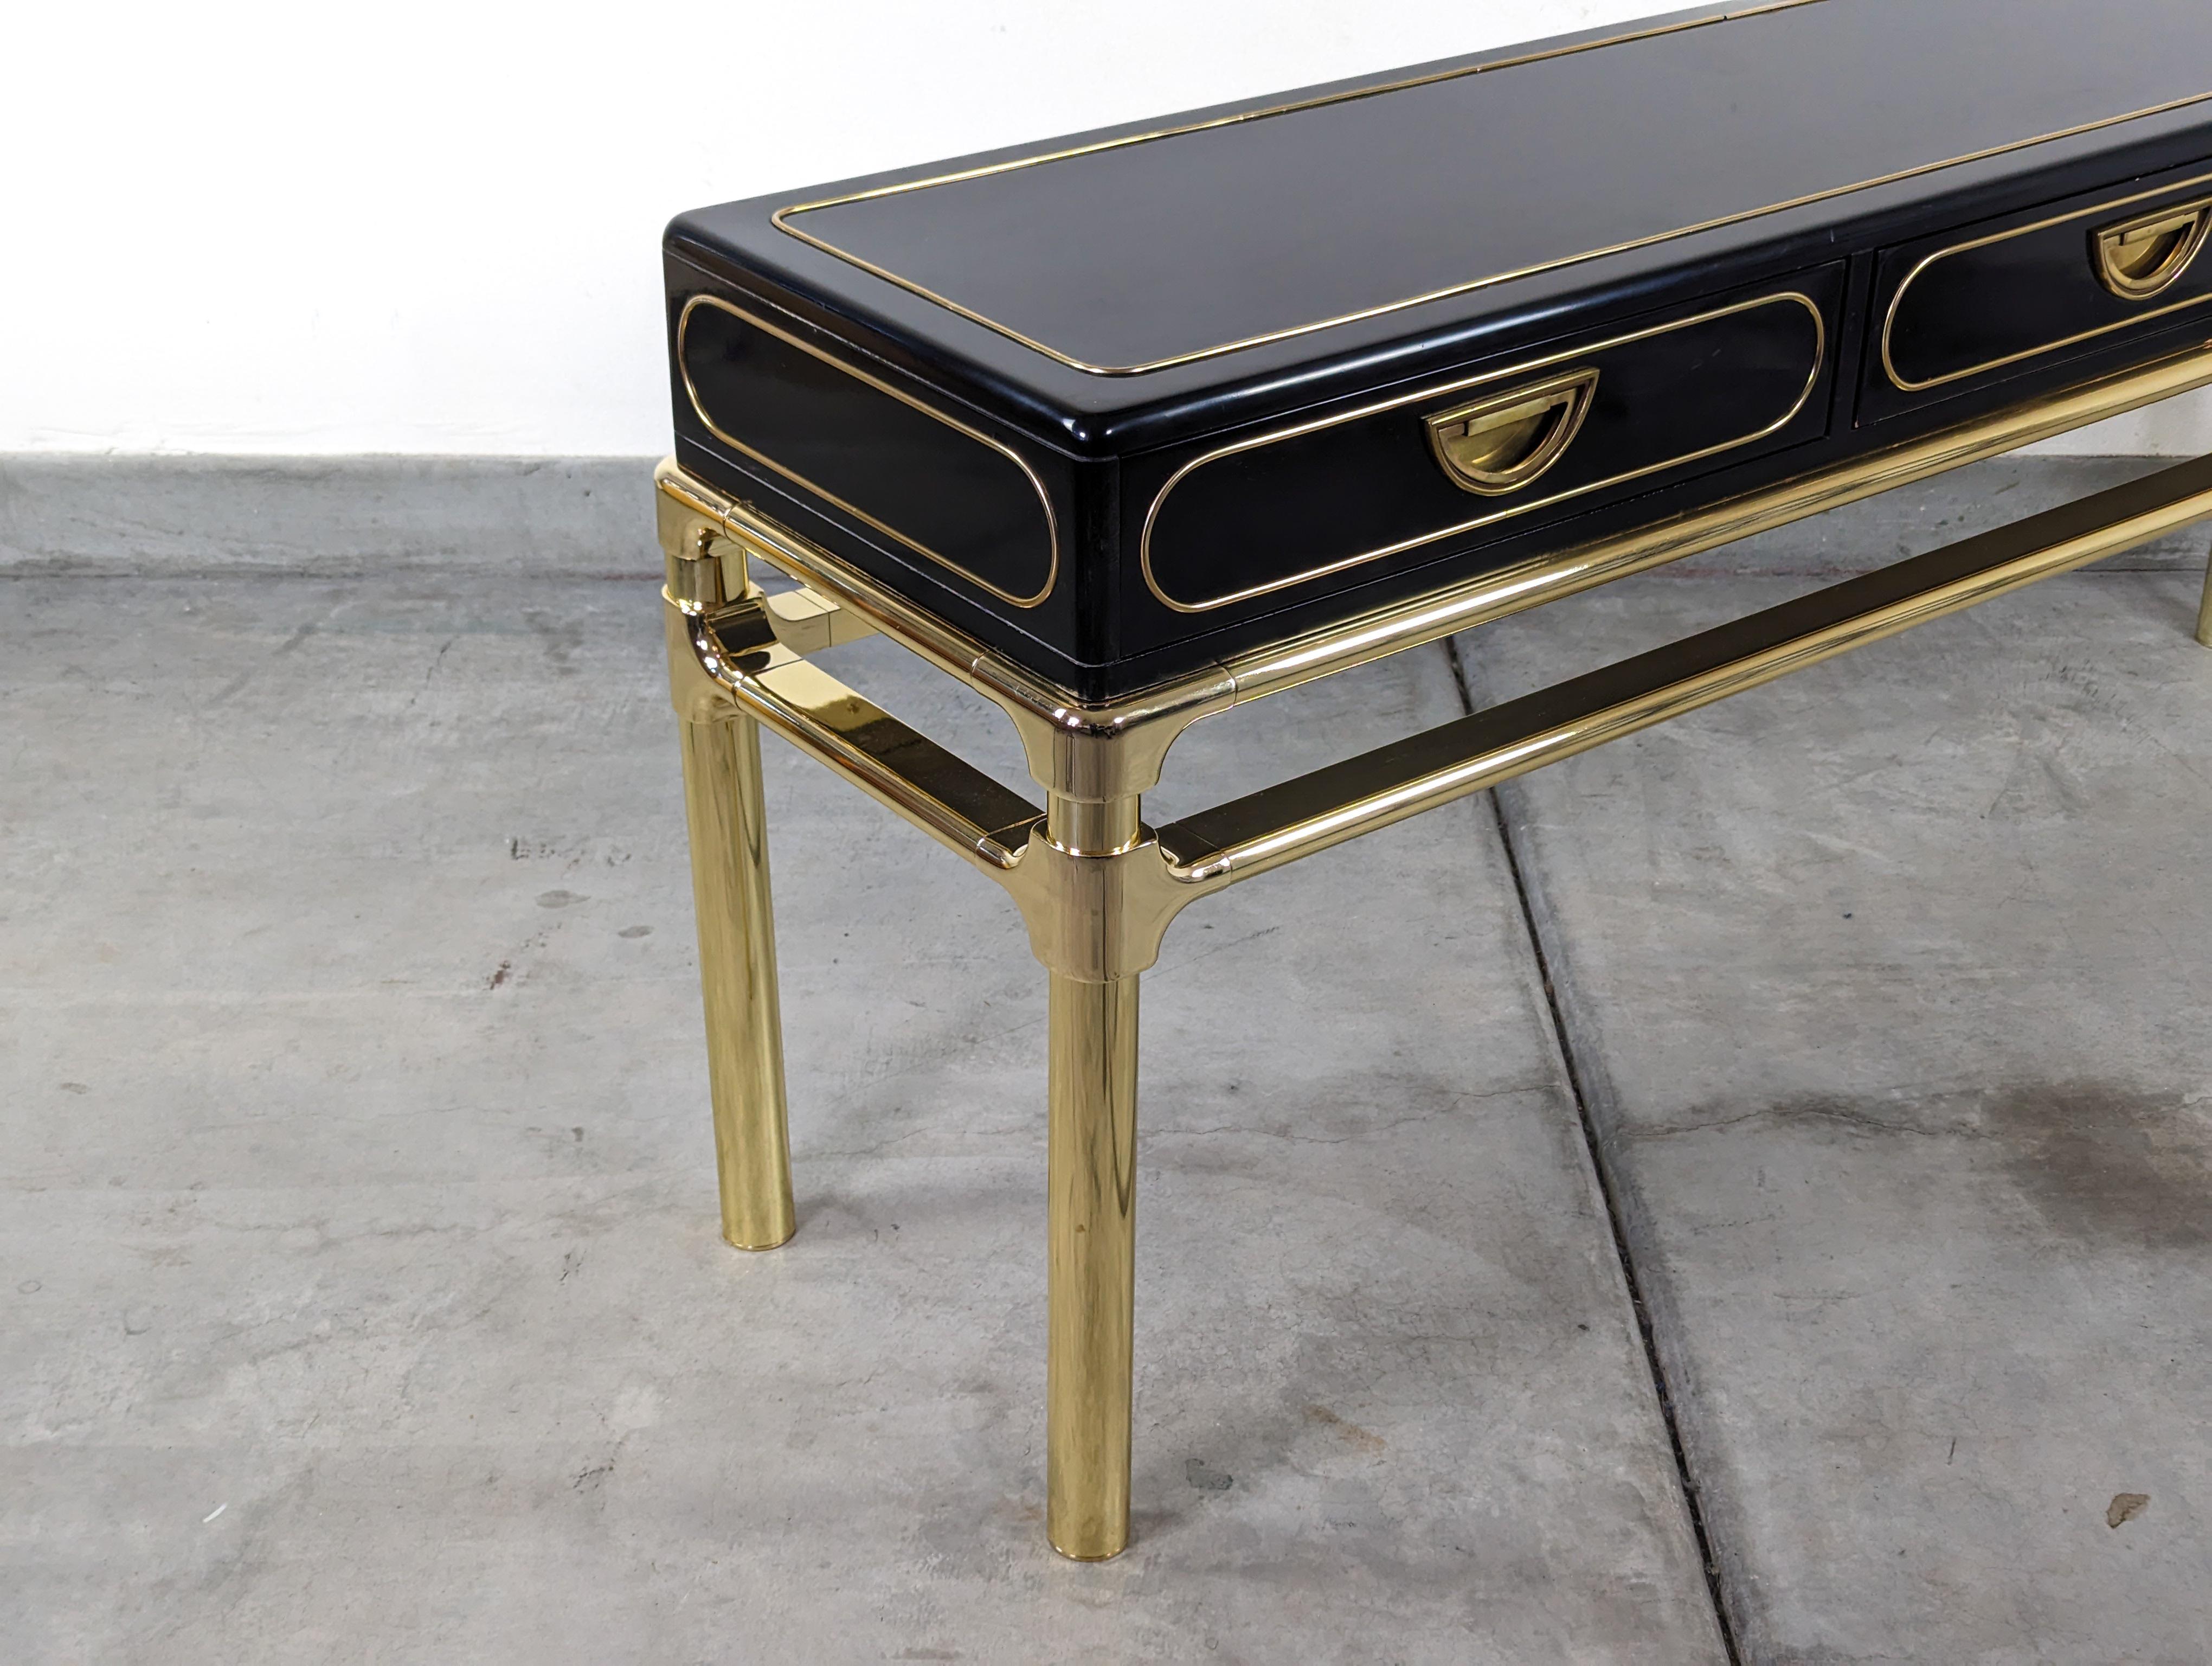 Brass and Black Lacquer Console Table With Drawers by Mastercraft, c1970s For Sale 4